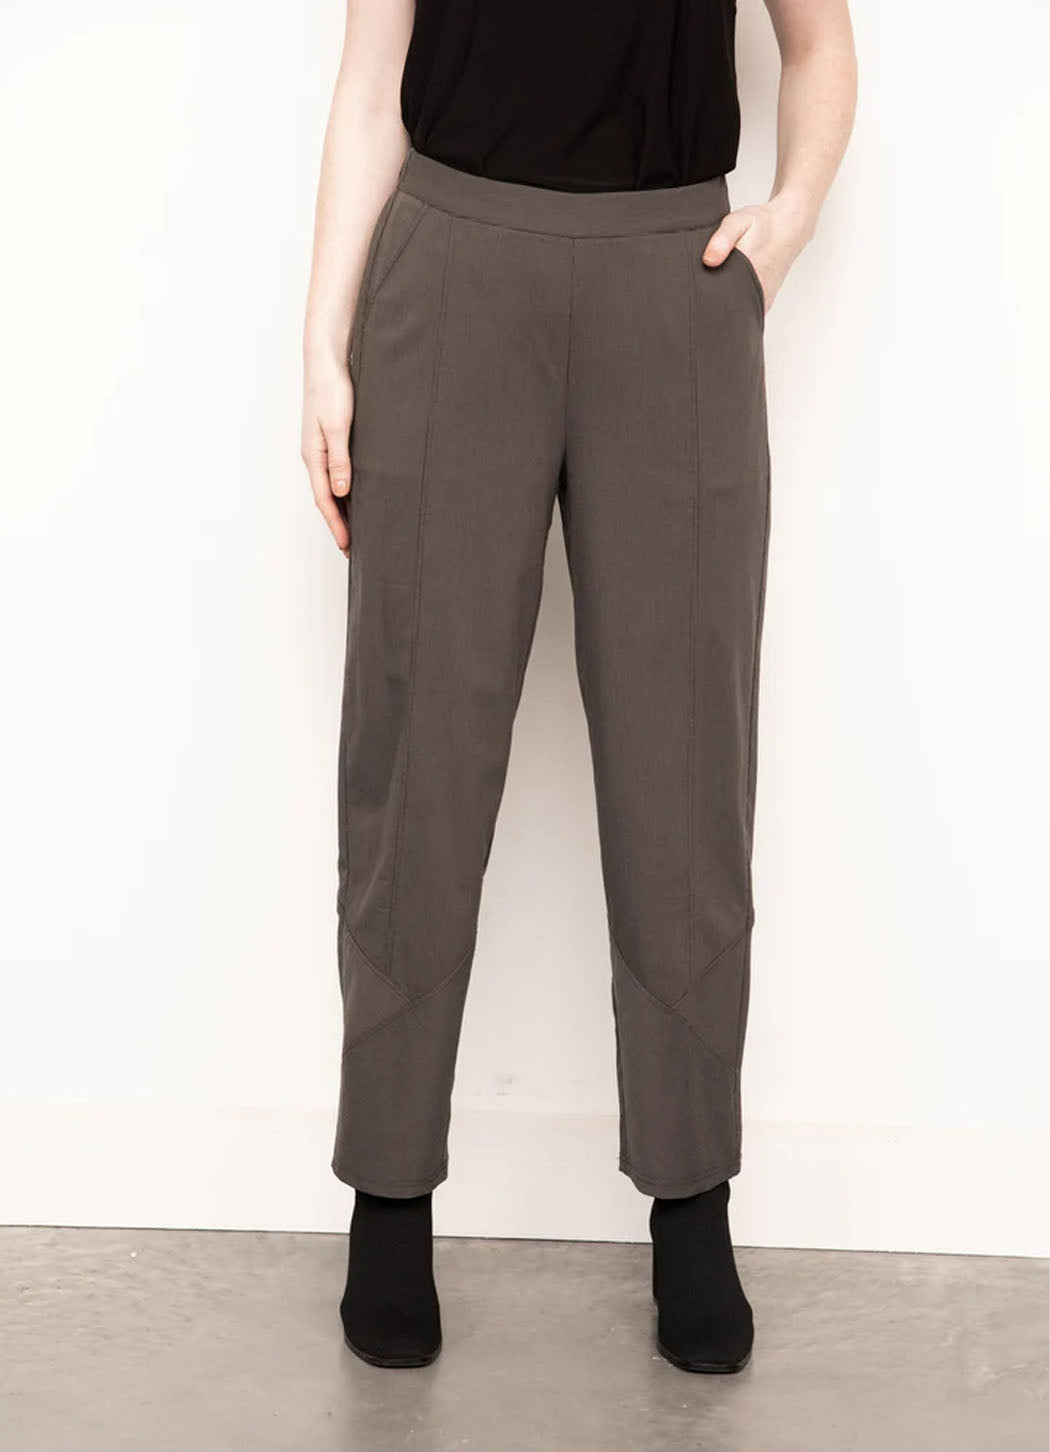 Express | High Waisted Luxe Comfort Knit Columnist Ankle Pant in Foundation  | Express Style Trial